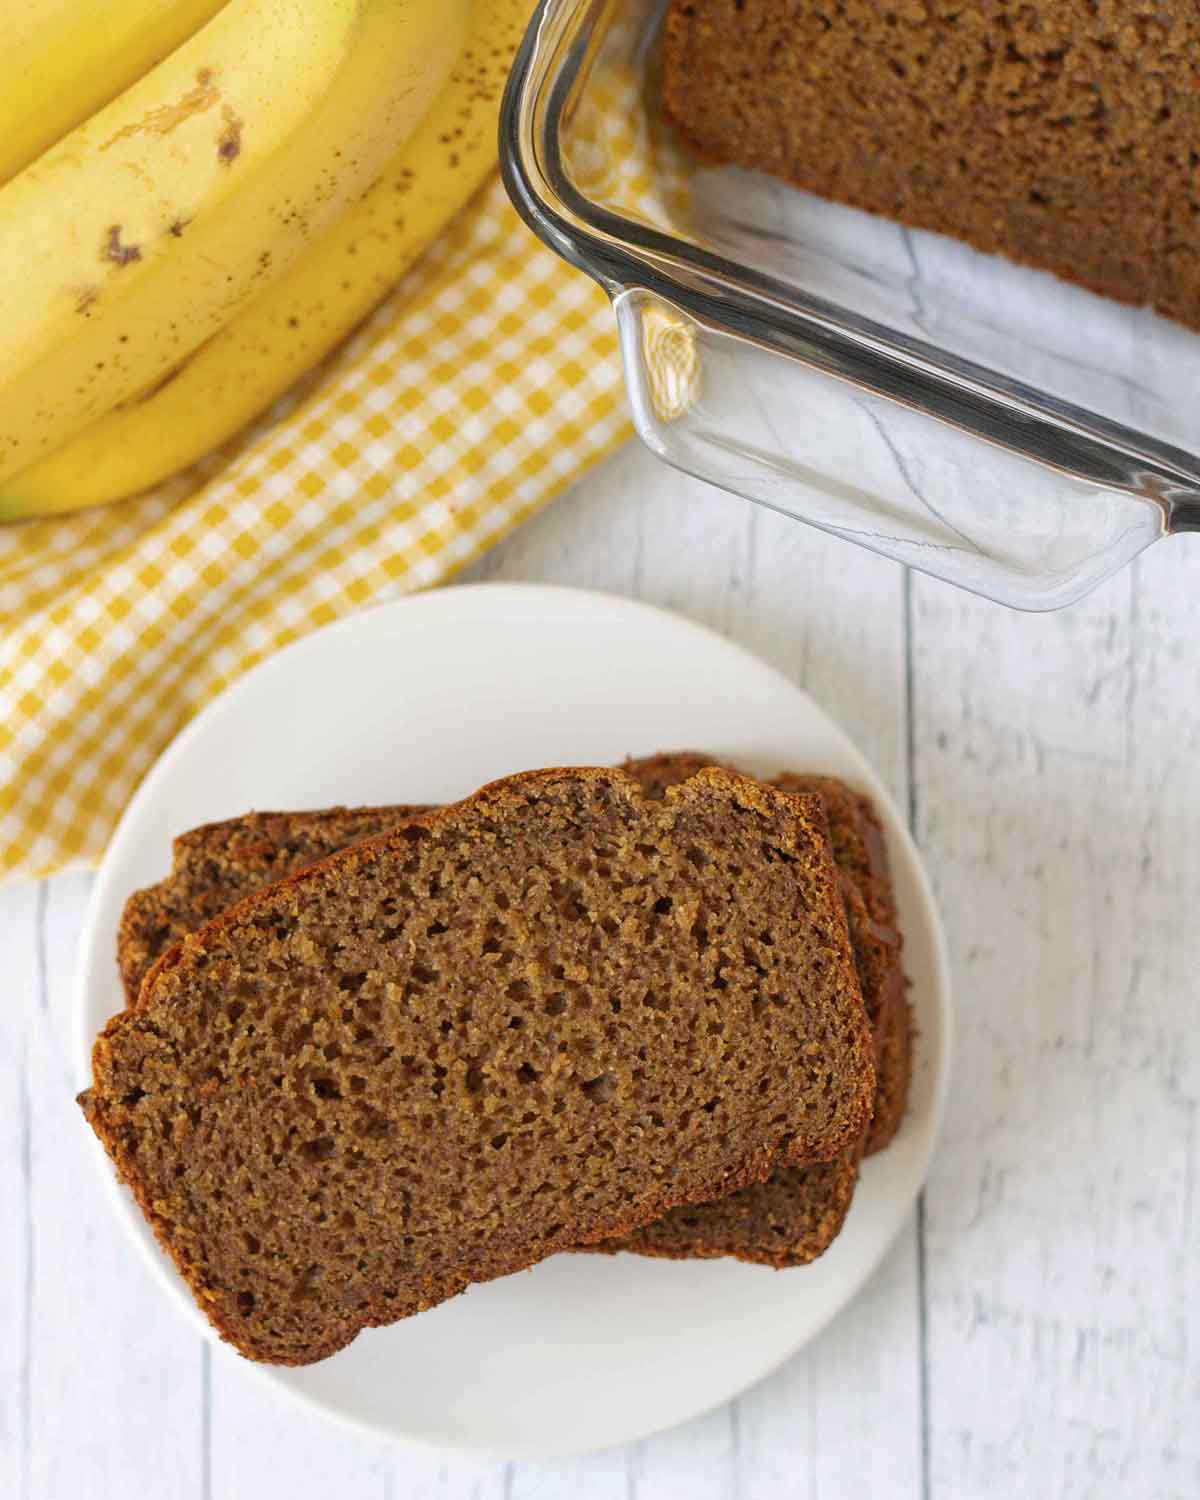 An overhead shot showing three slices of vegan banana bread on a white plate.